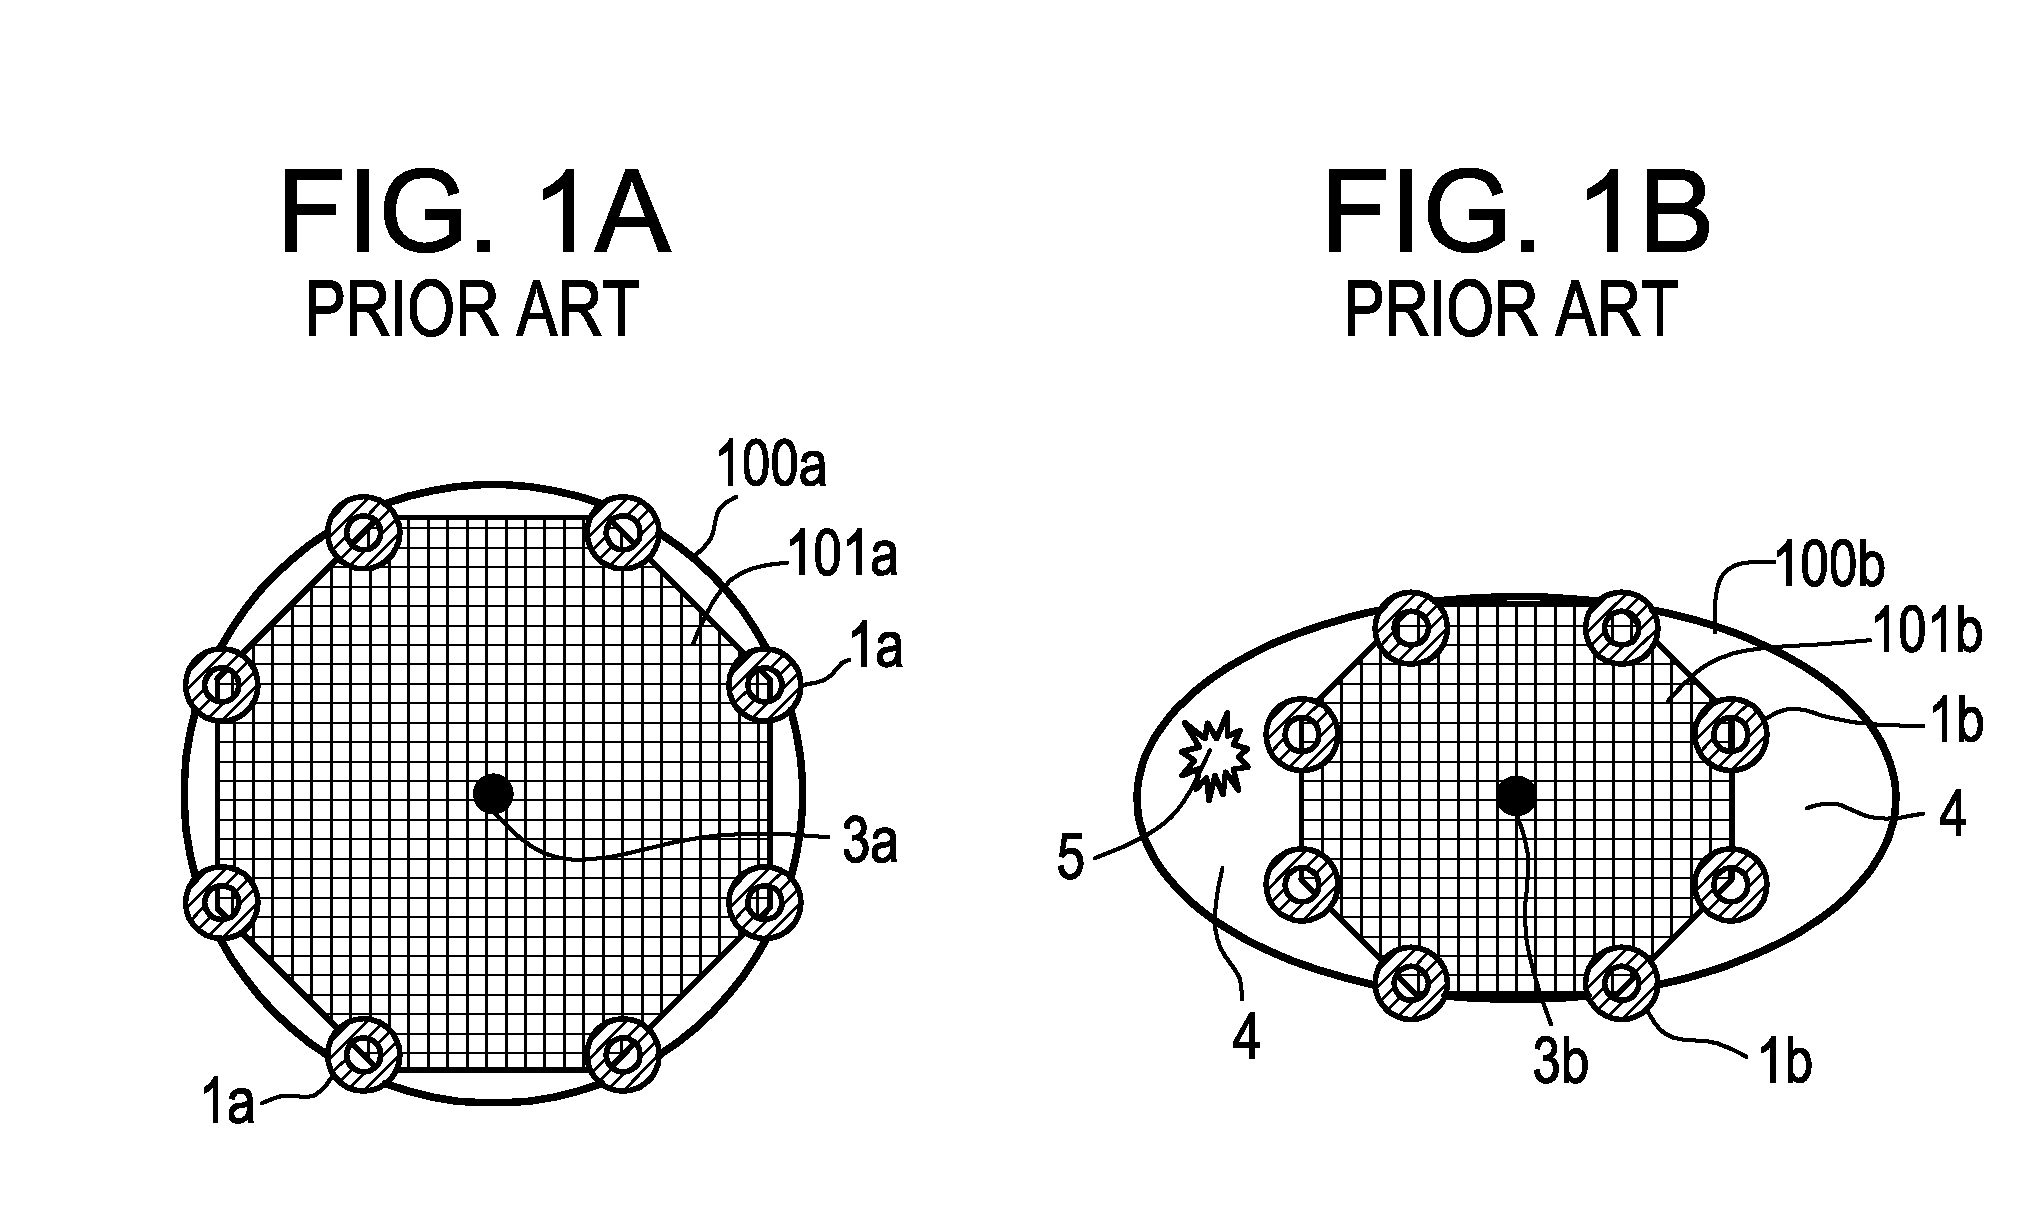 Distal Protection Filter with Improved Wall Apposition